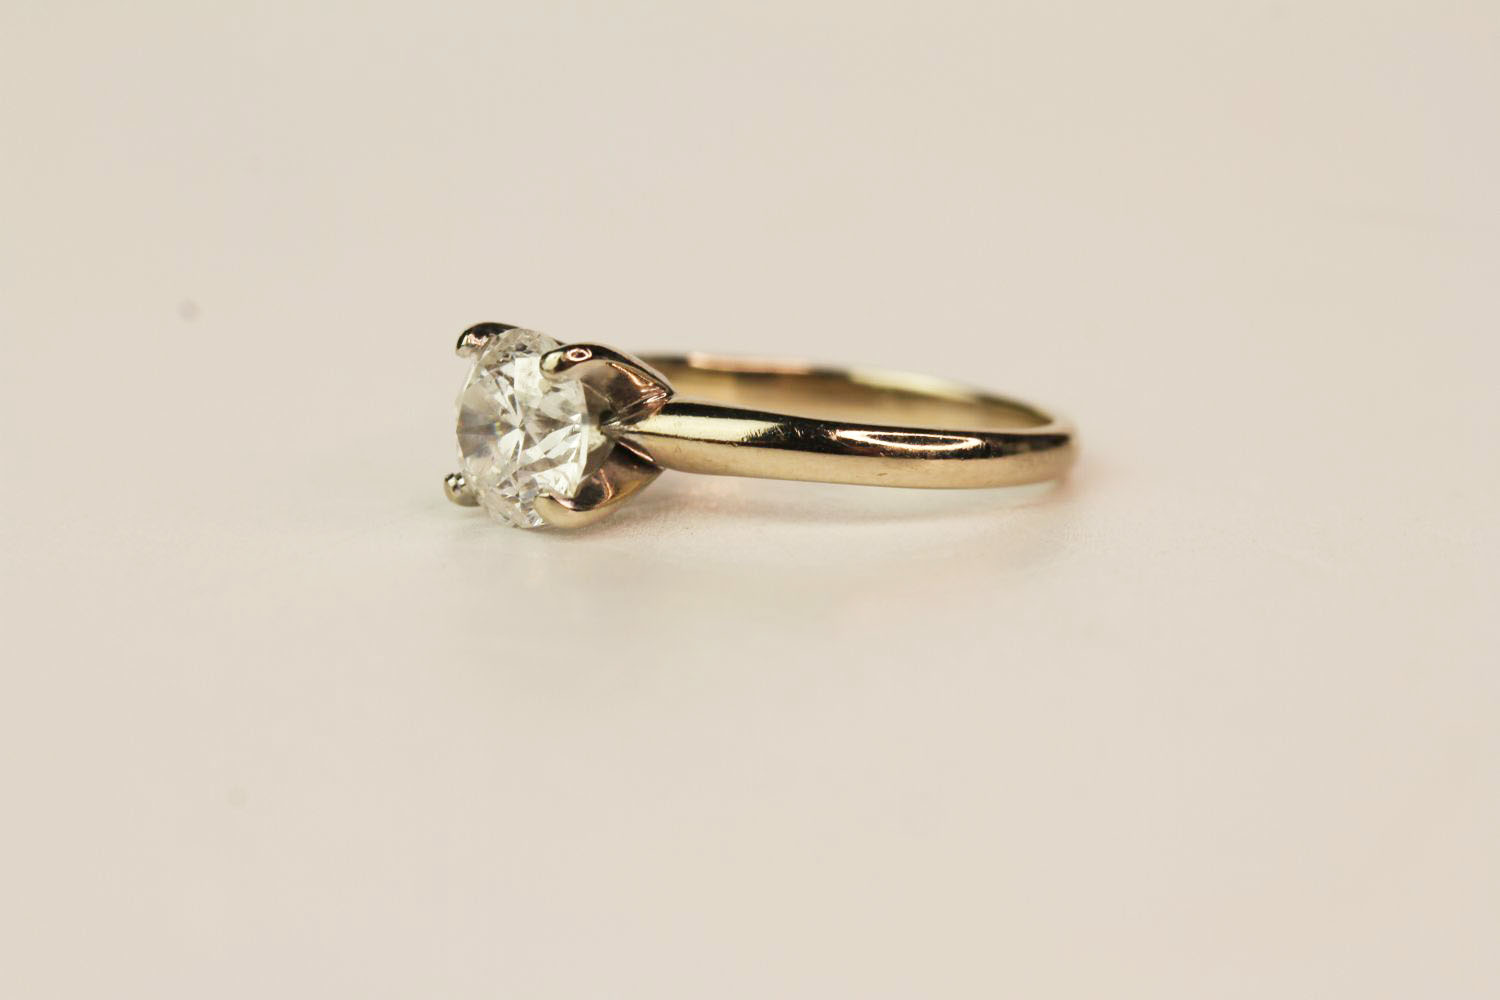 Solitaire Diamond Ring, set with 1 round brilliant cut diamond, 4 claw set, 14ct white gold band, - Image 4 of 4